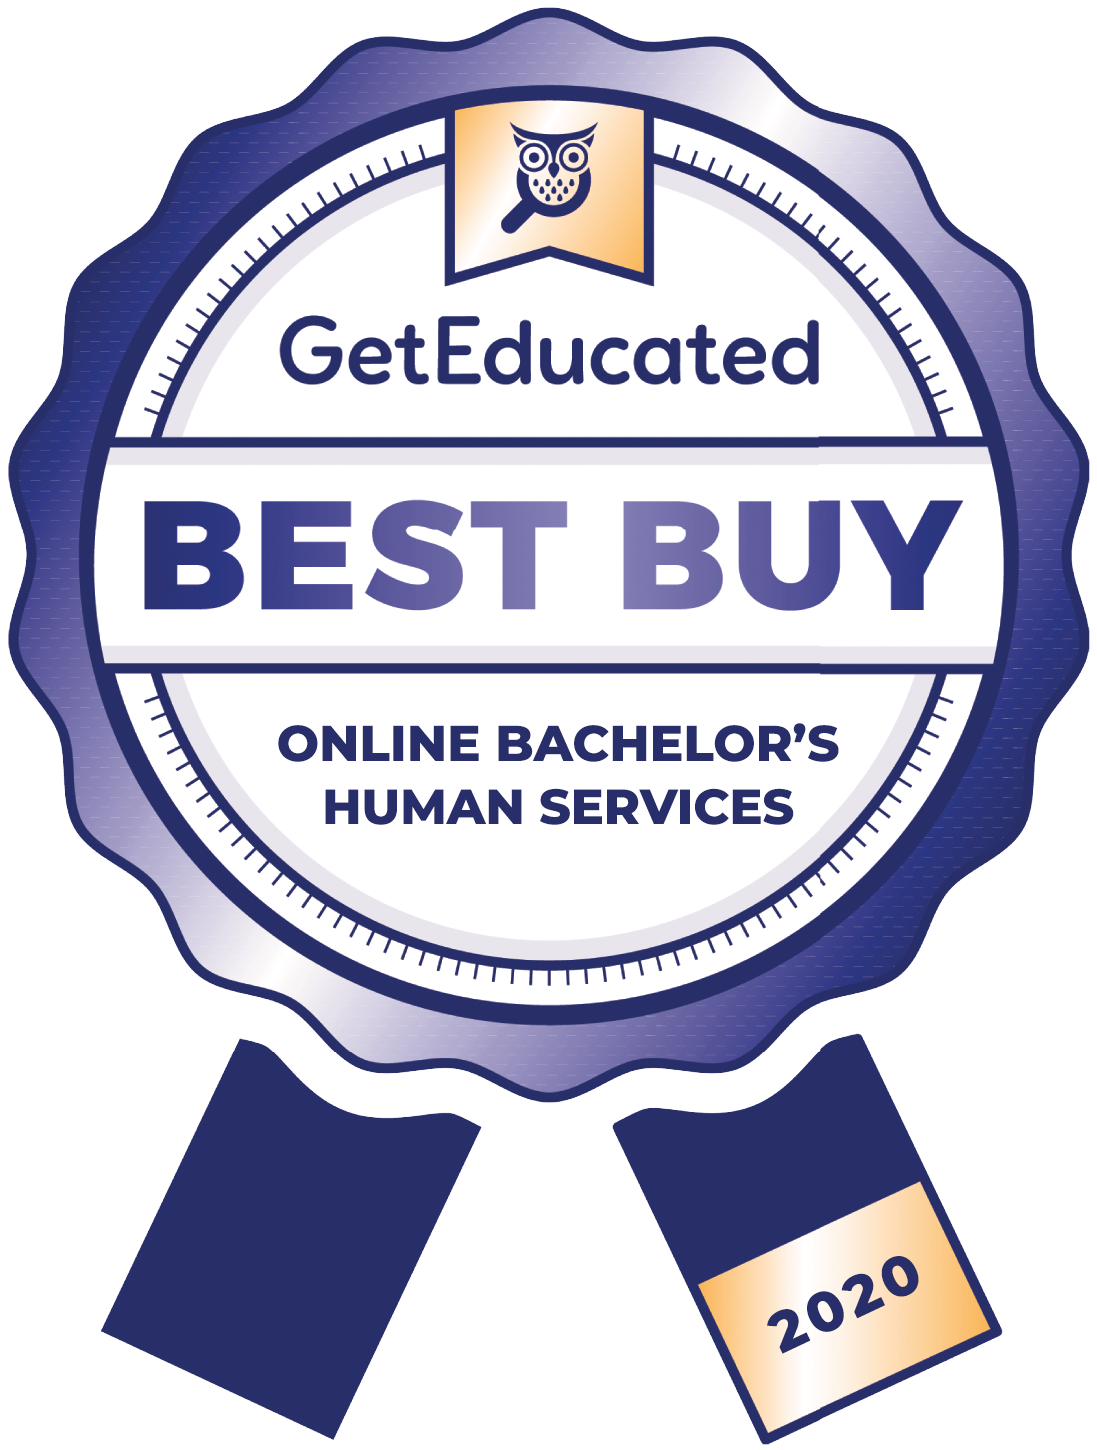 Bachelors HumanServices 